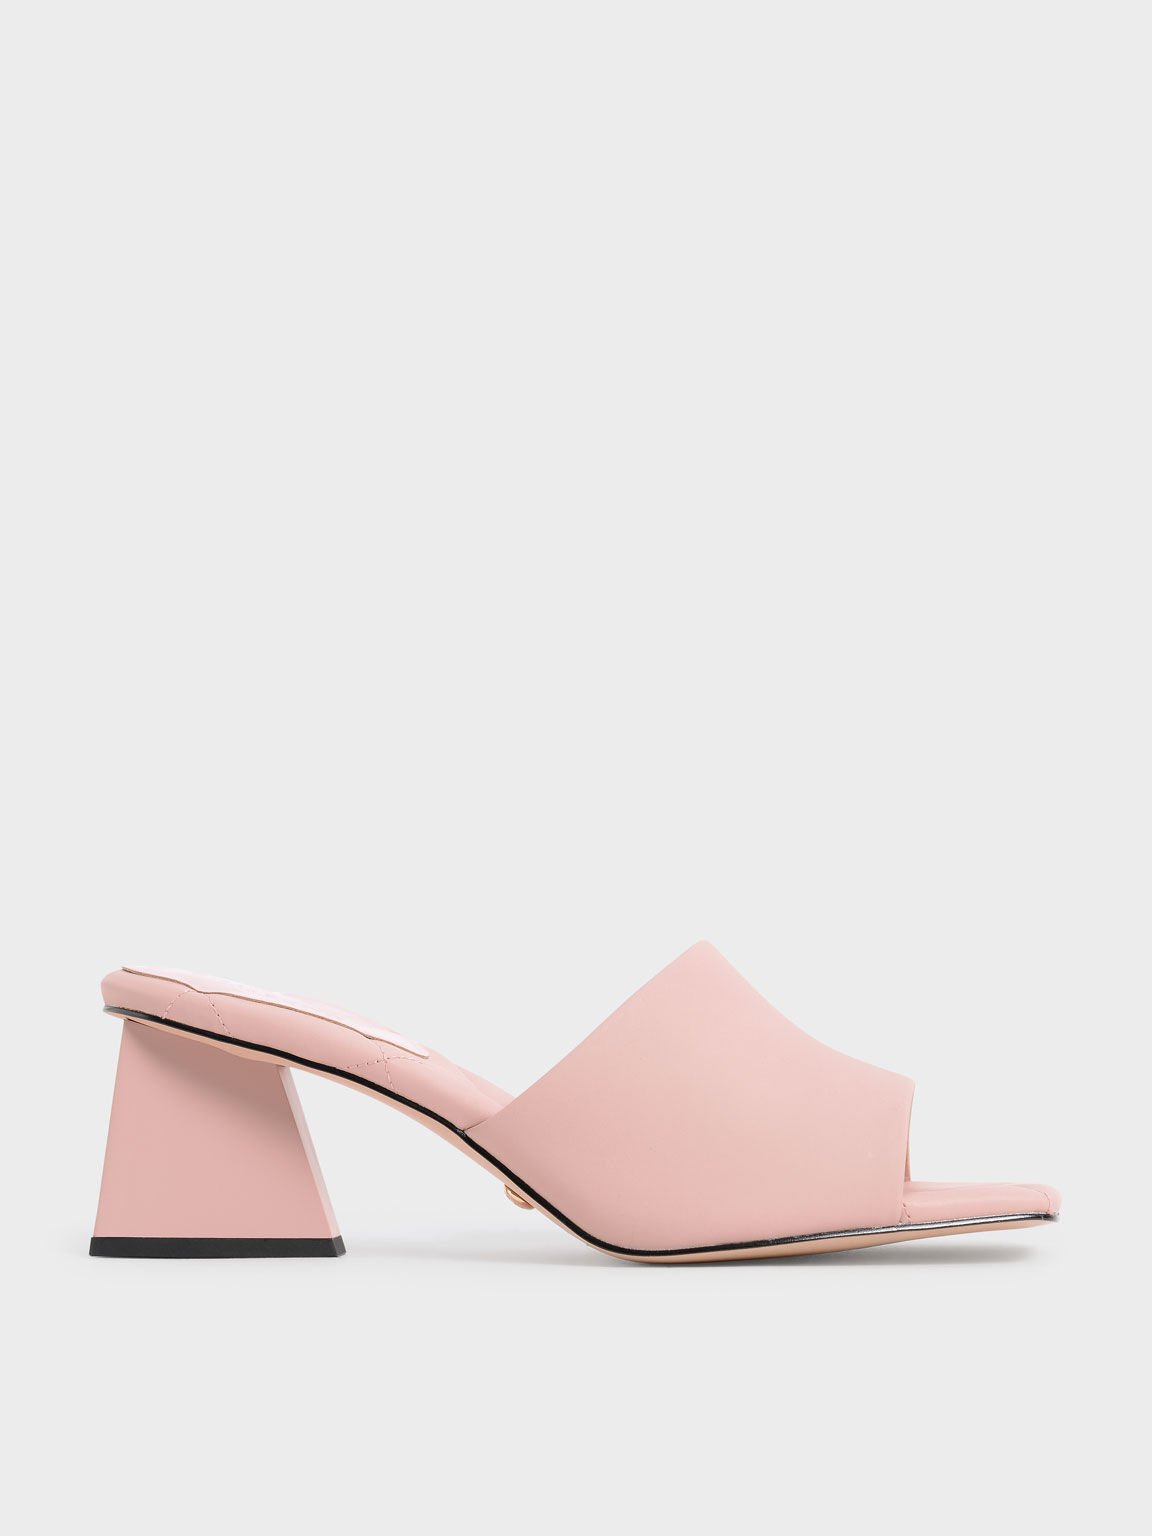 Leather Trapeze Heel Mules, Pink, hi-res